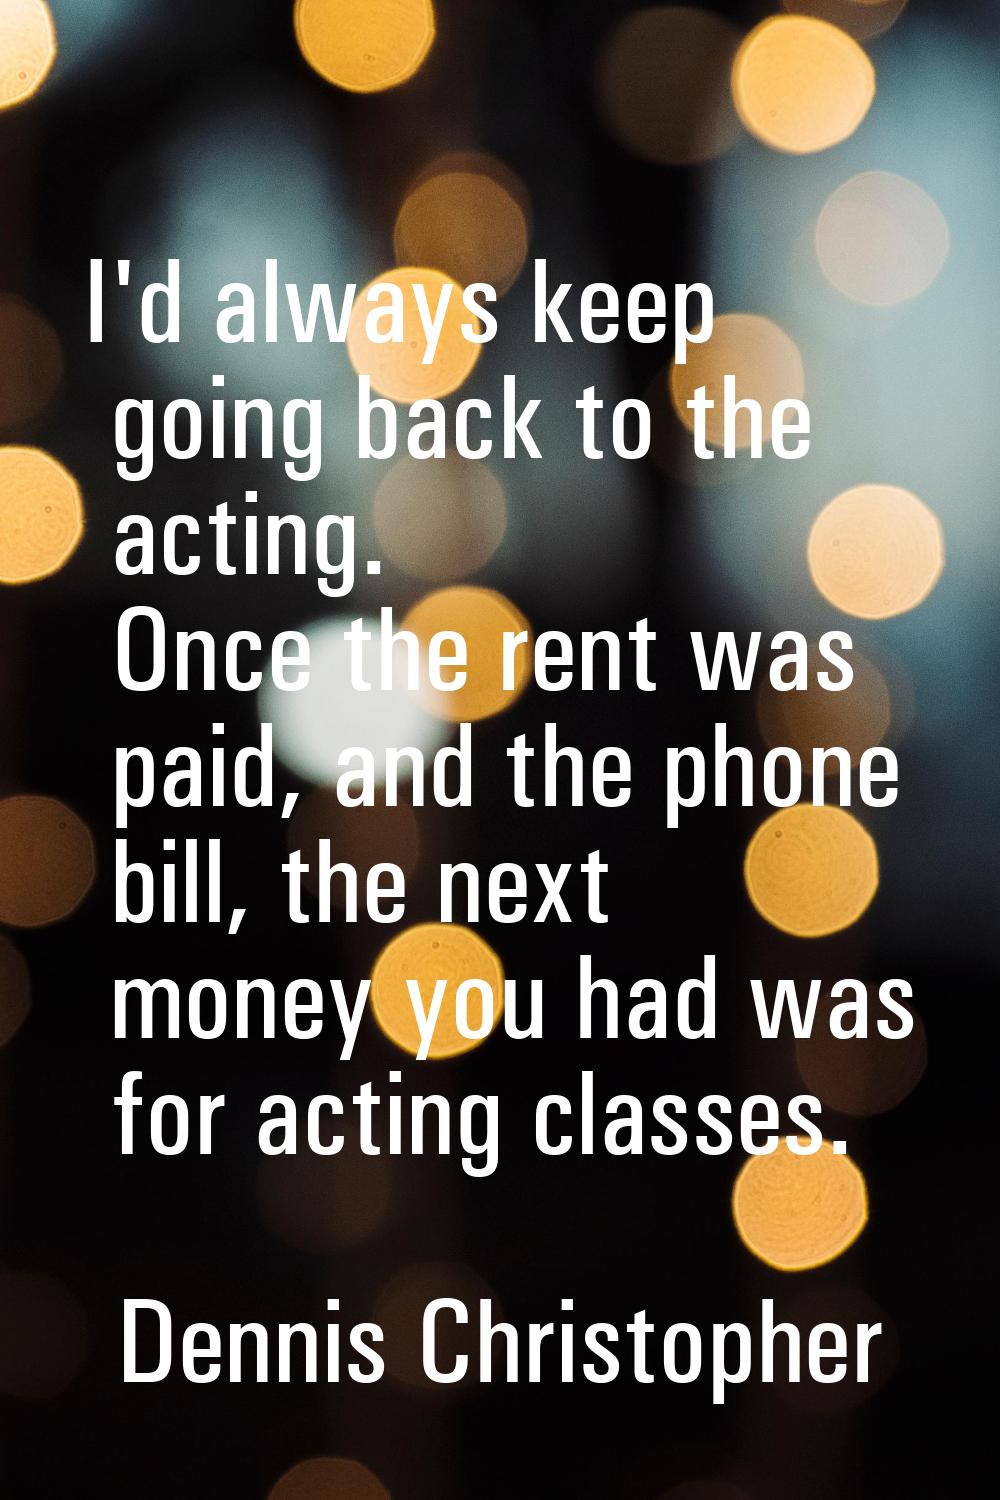 I'd always keep going back to the acting. Once the rent was paid, and the phone bill, the next mone